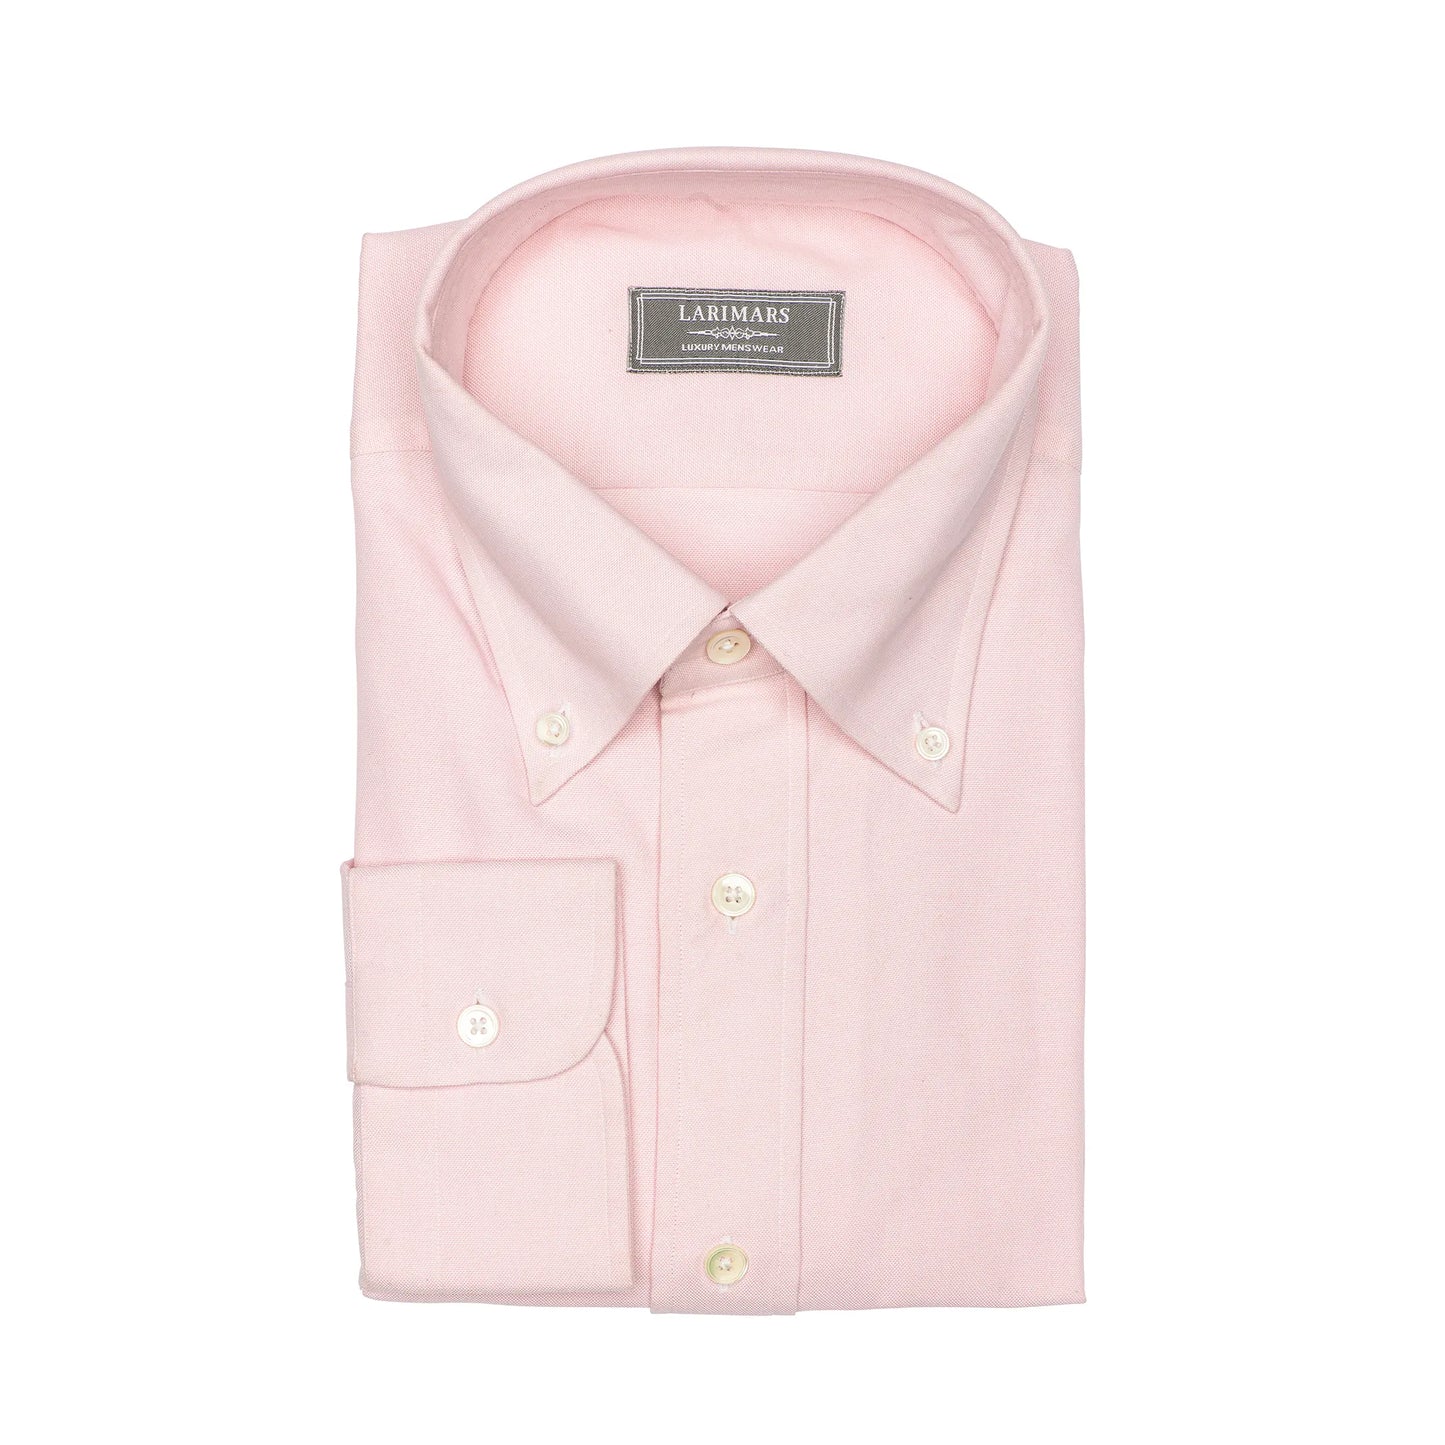 Pink Pin Oxford - Larimars Clothing Men's Formal and casual wear shirts